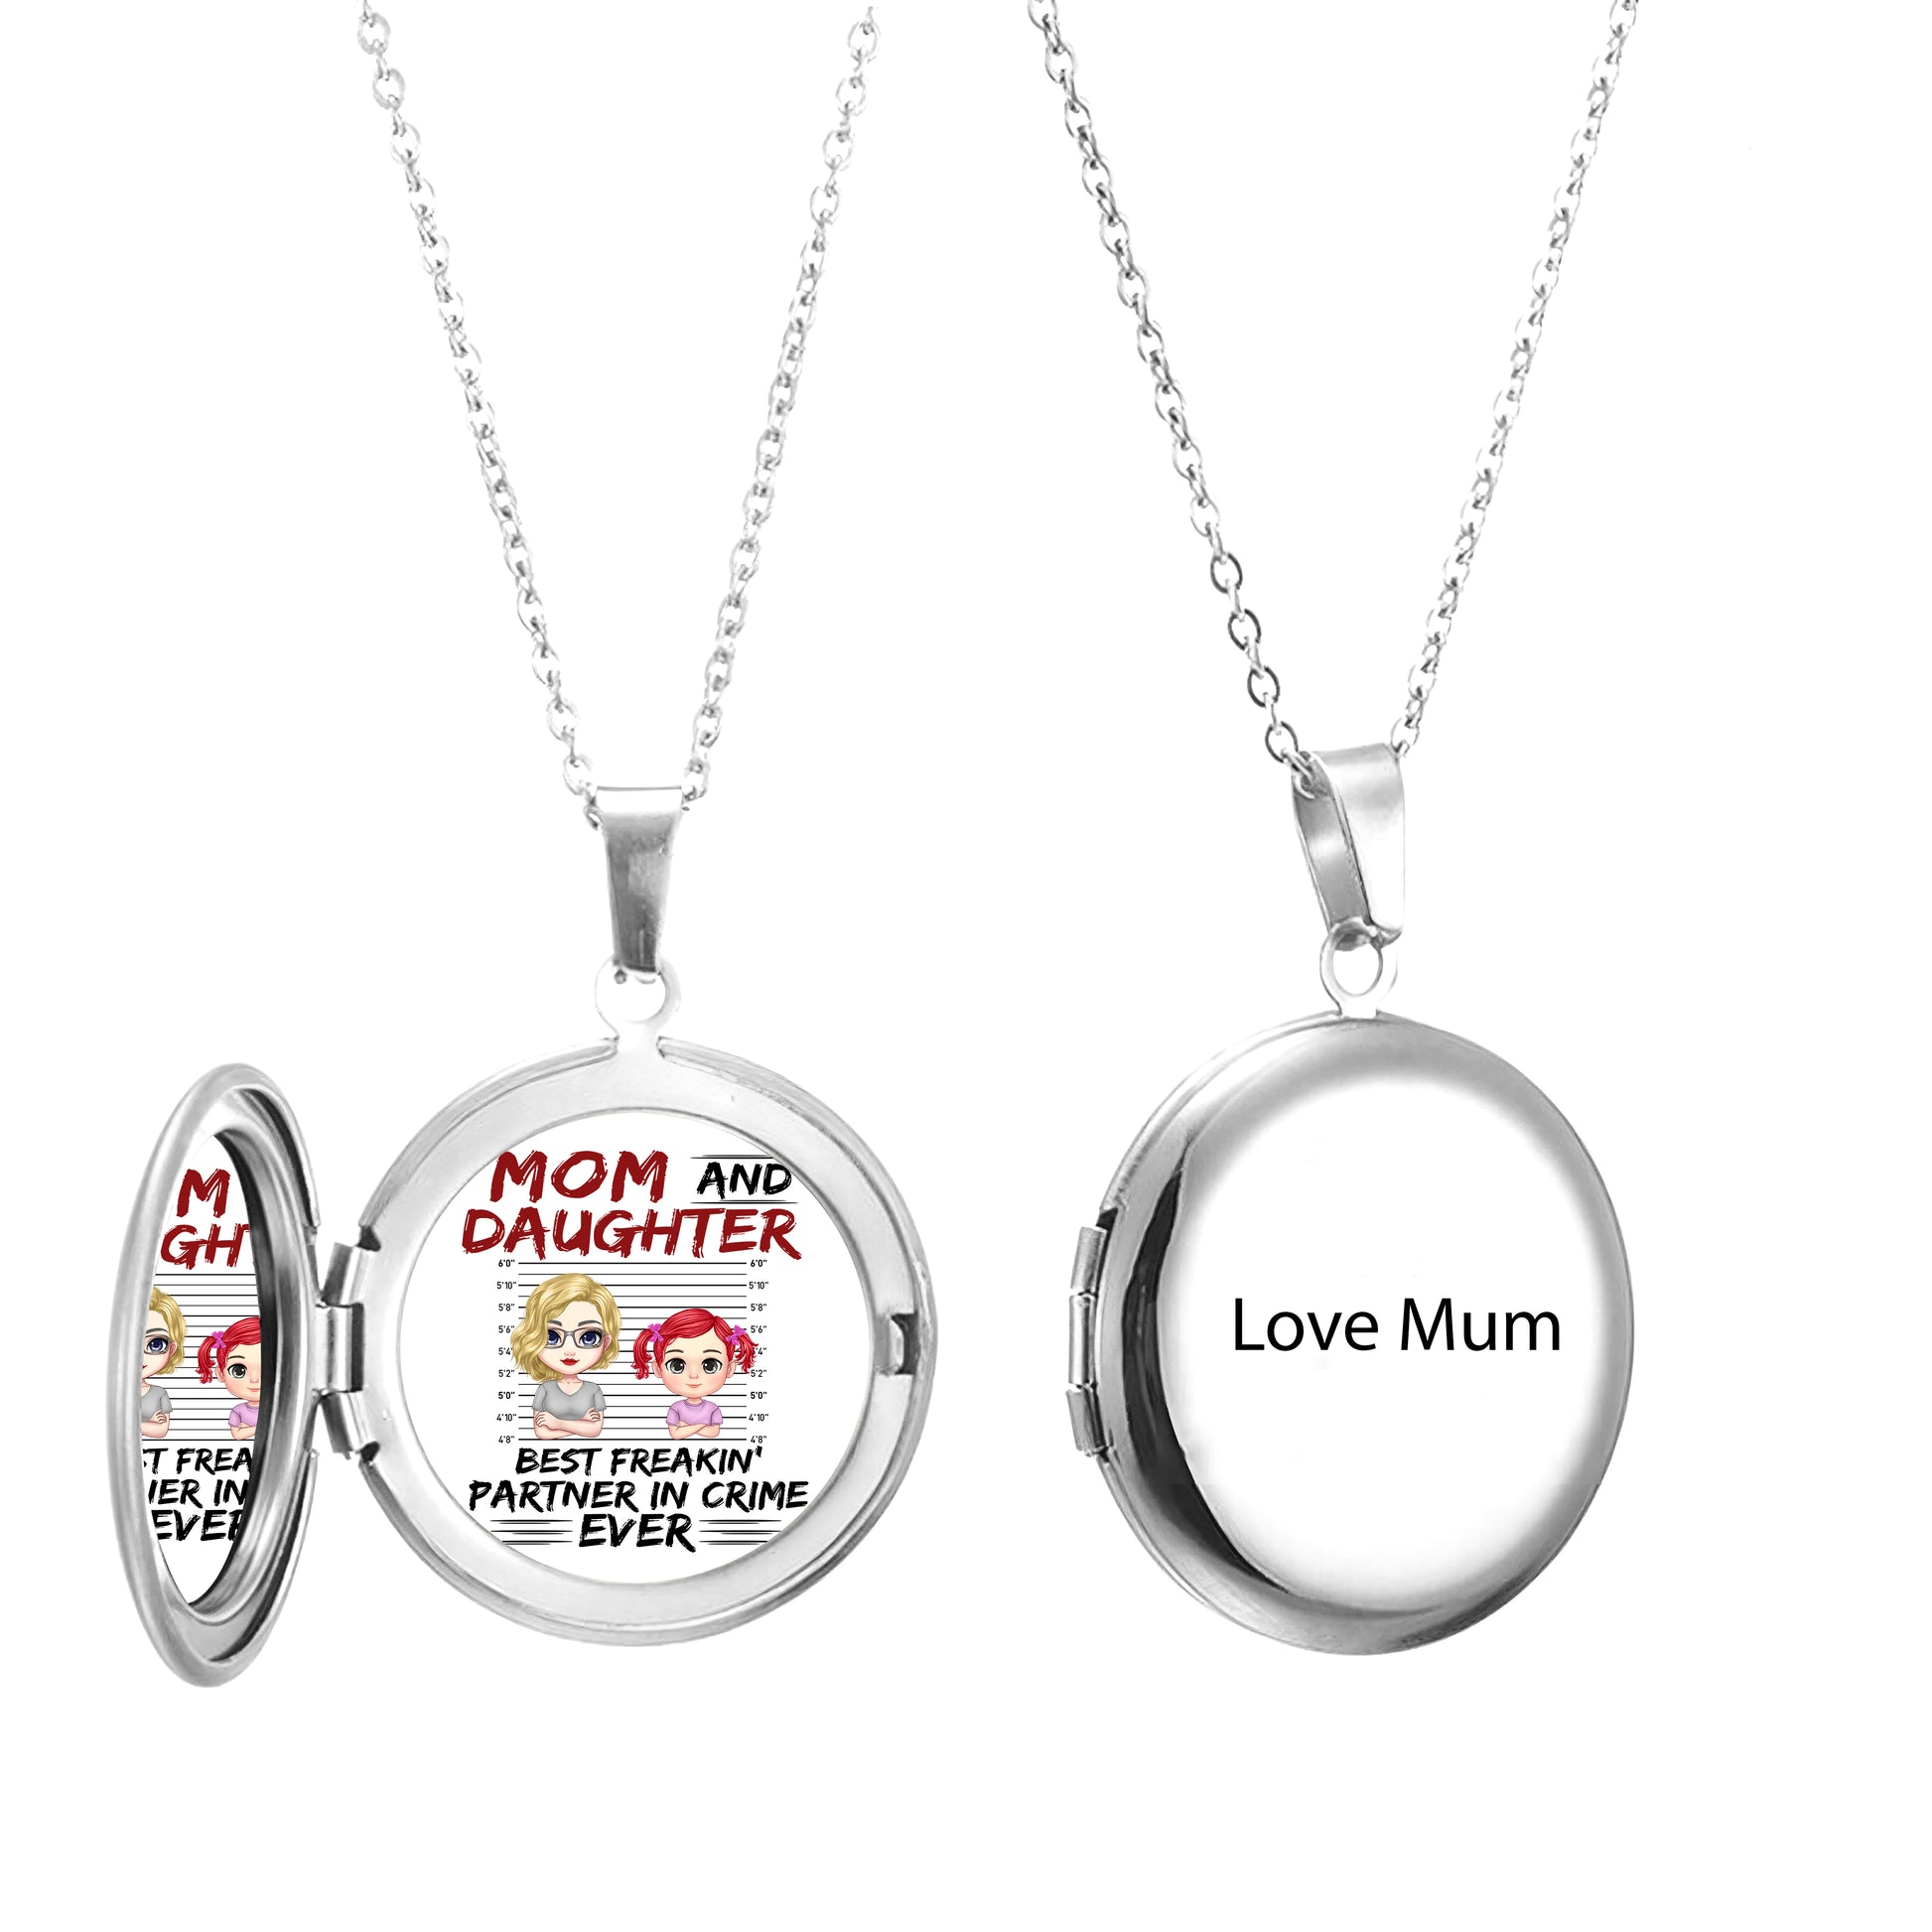 Best Freakin Partners In Crime - Personalized Locket Necklace - Gifts For Mum, Mothering Sunday, Mother's Day